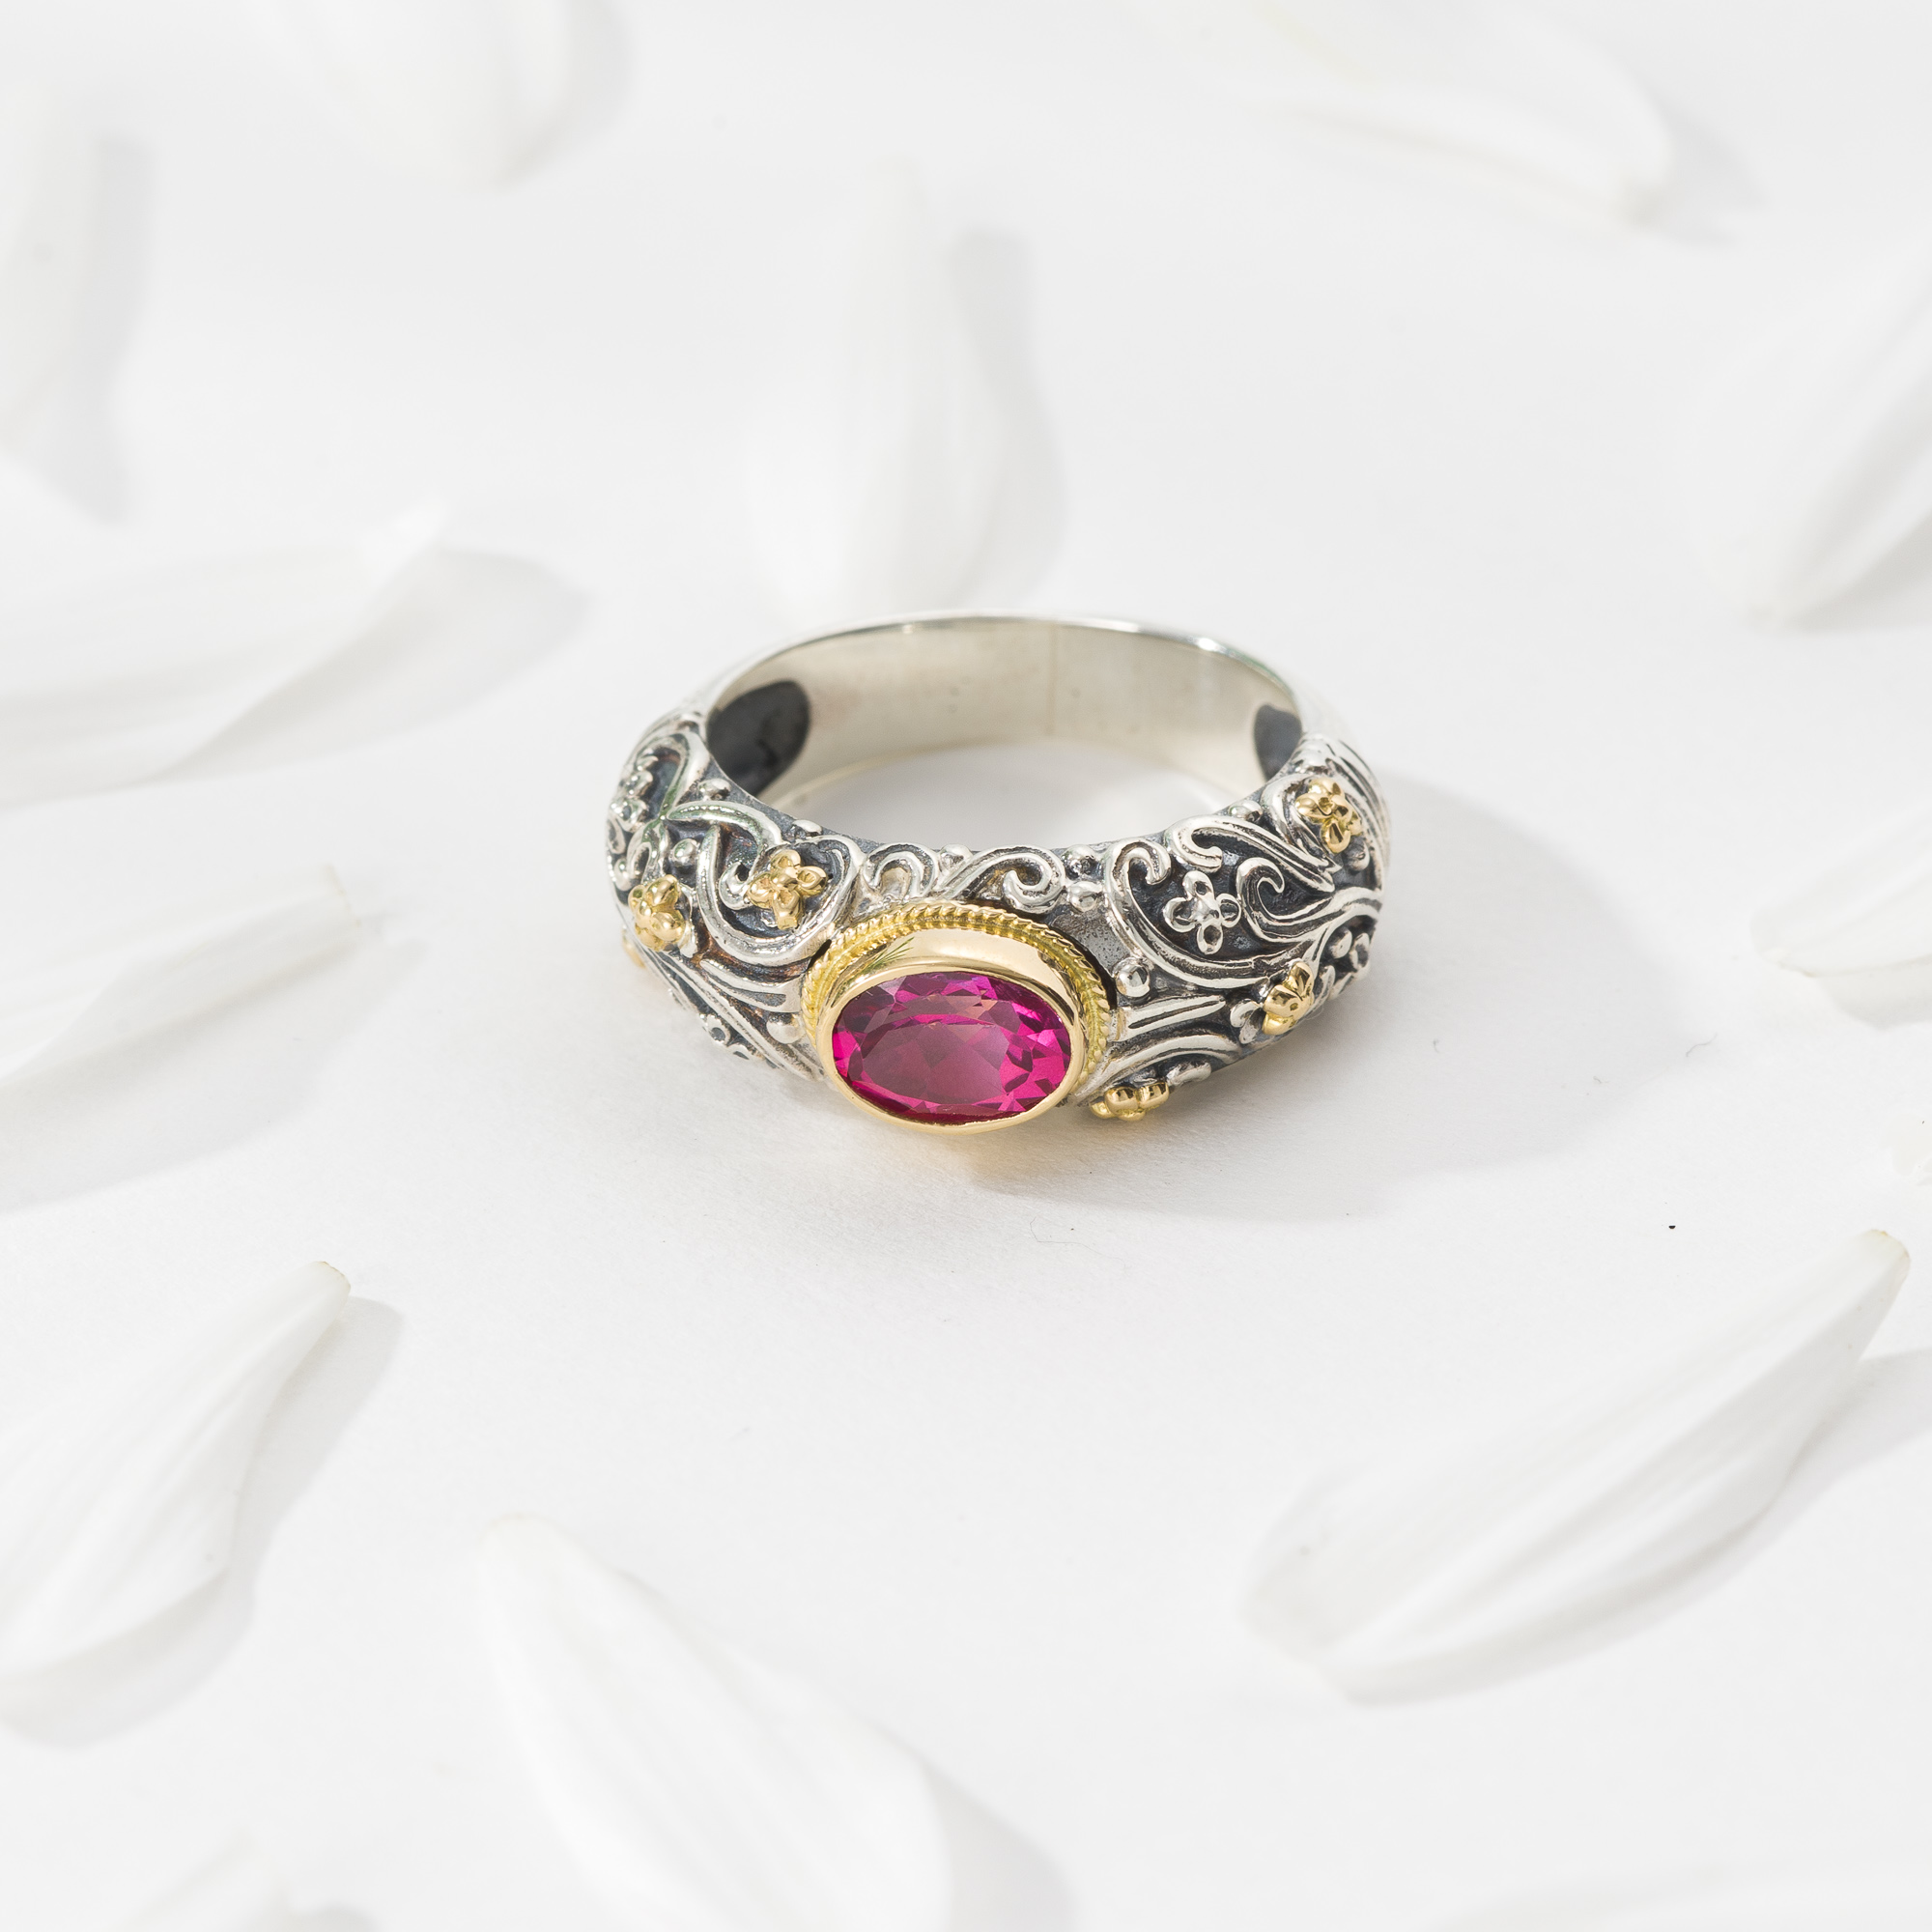 Eve Eden's Garden ring in 18K Gold and Sterling Silver with pink topaz